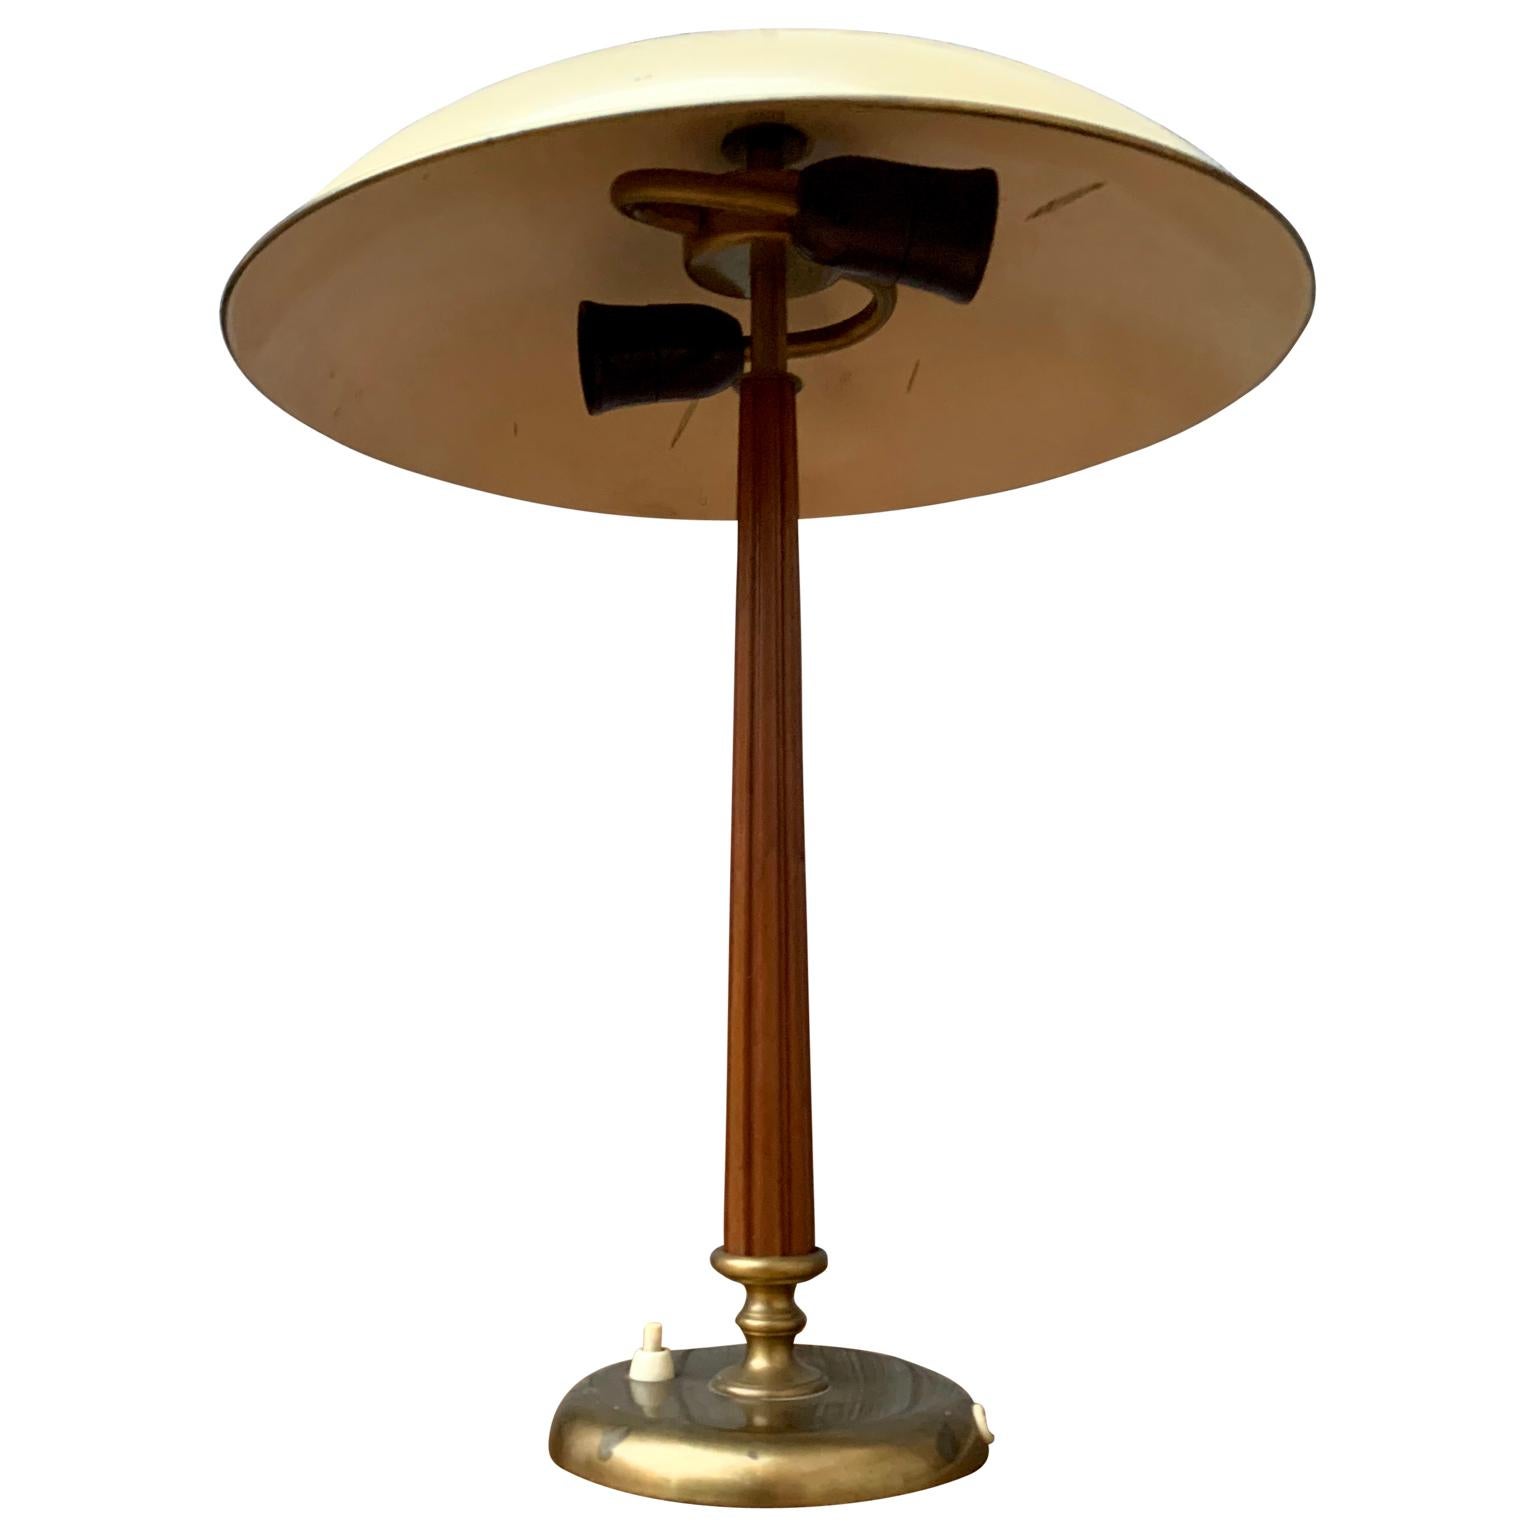 A Swedish Grace-period Art Deco table lamp in original un-touched patina. The lamp is made in brass, mahogany and creme-colored lacquered metal. From circa 1940 and attributed to designer Harald Notini out of Stockholm for 